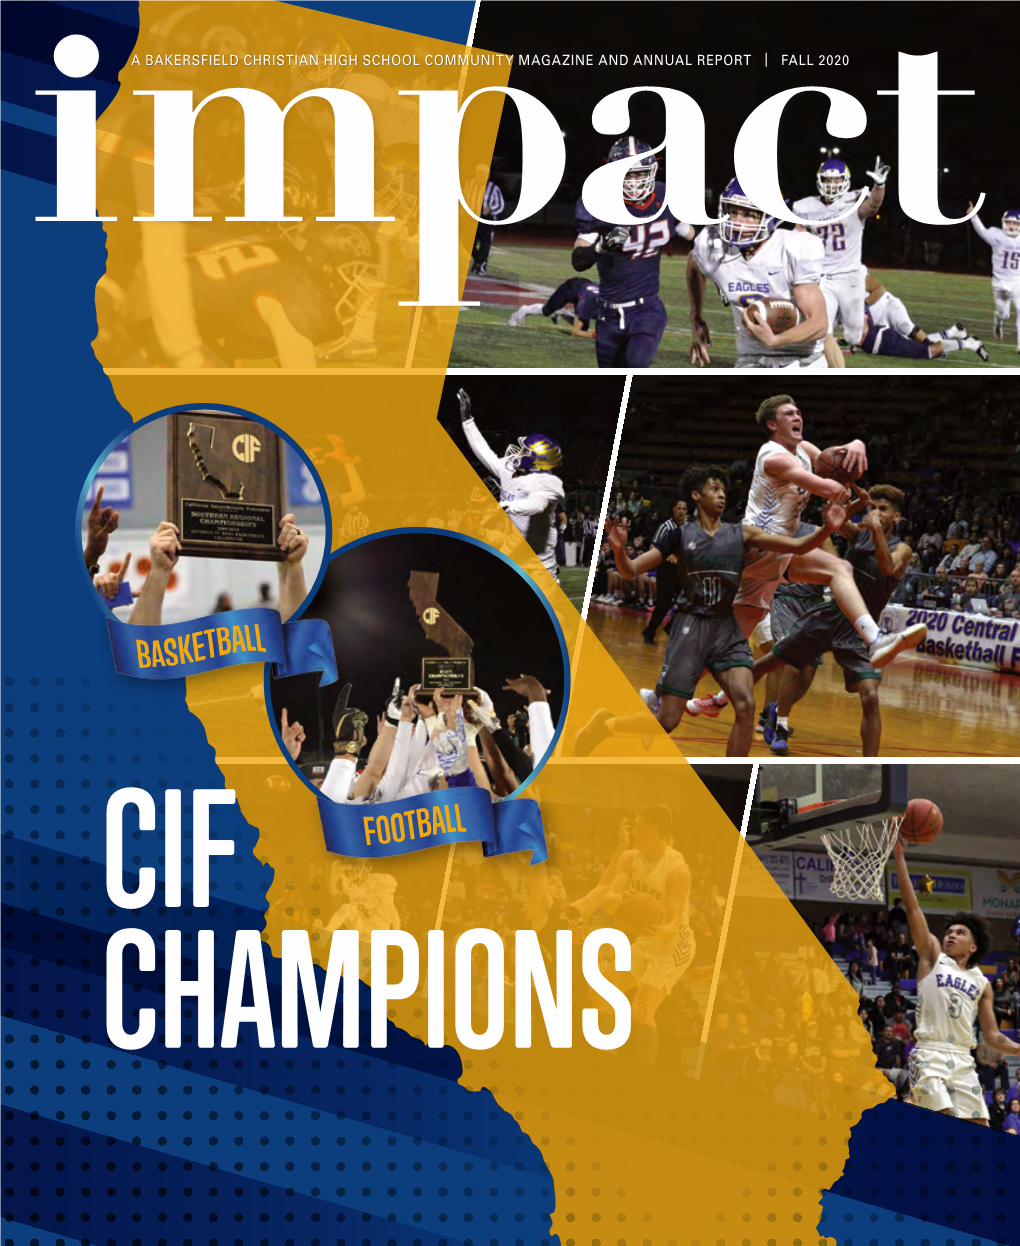 Fall 2020 a Bakersfield Christian High School Community Magazine and Annual Report